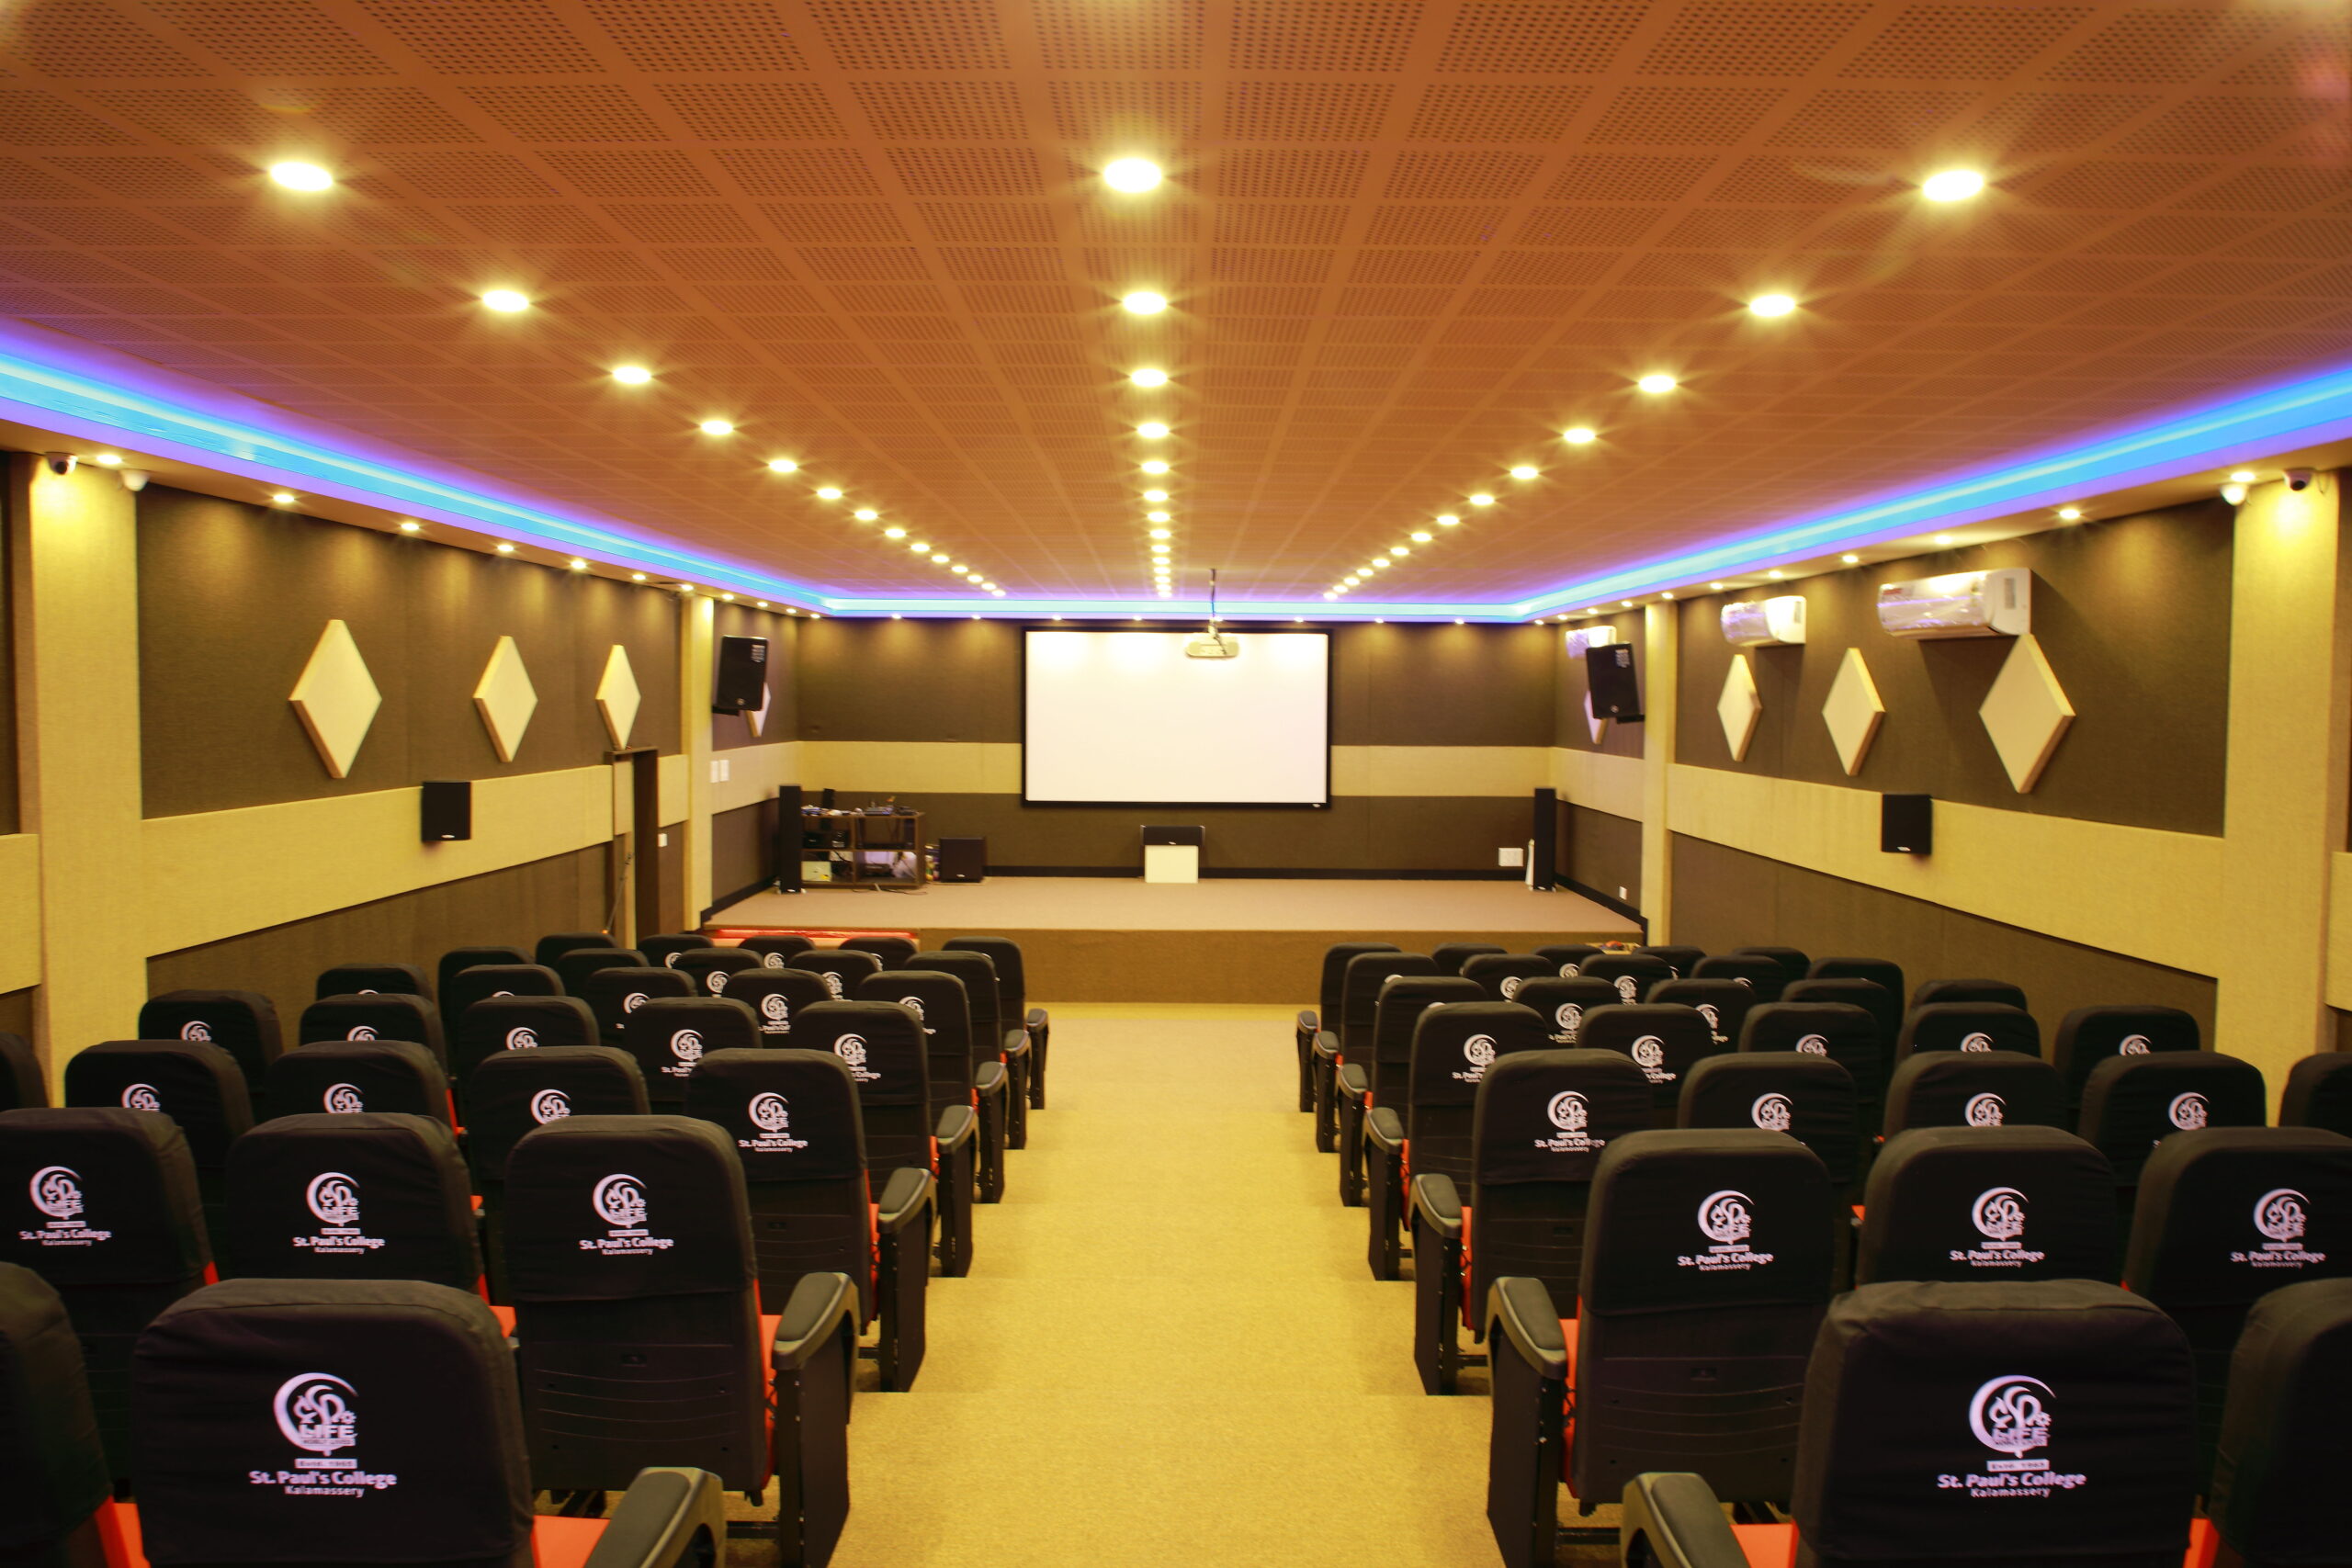 Acoustic Theater